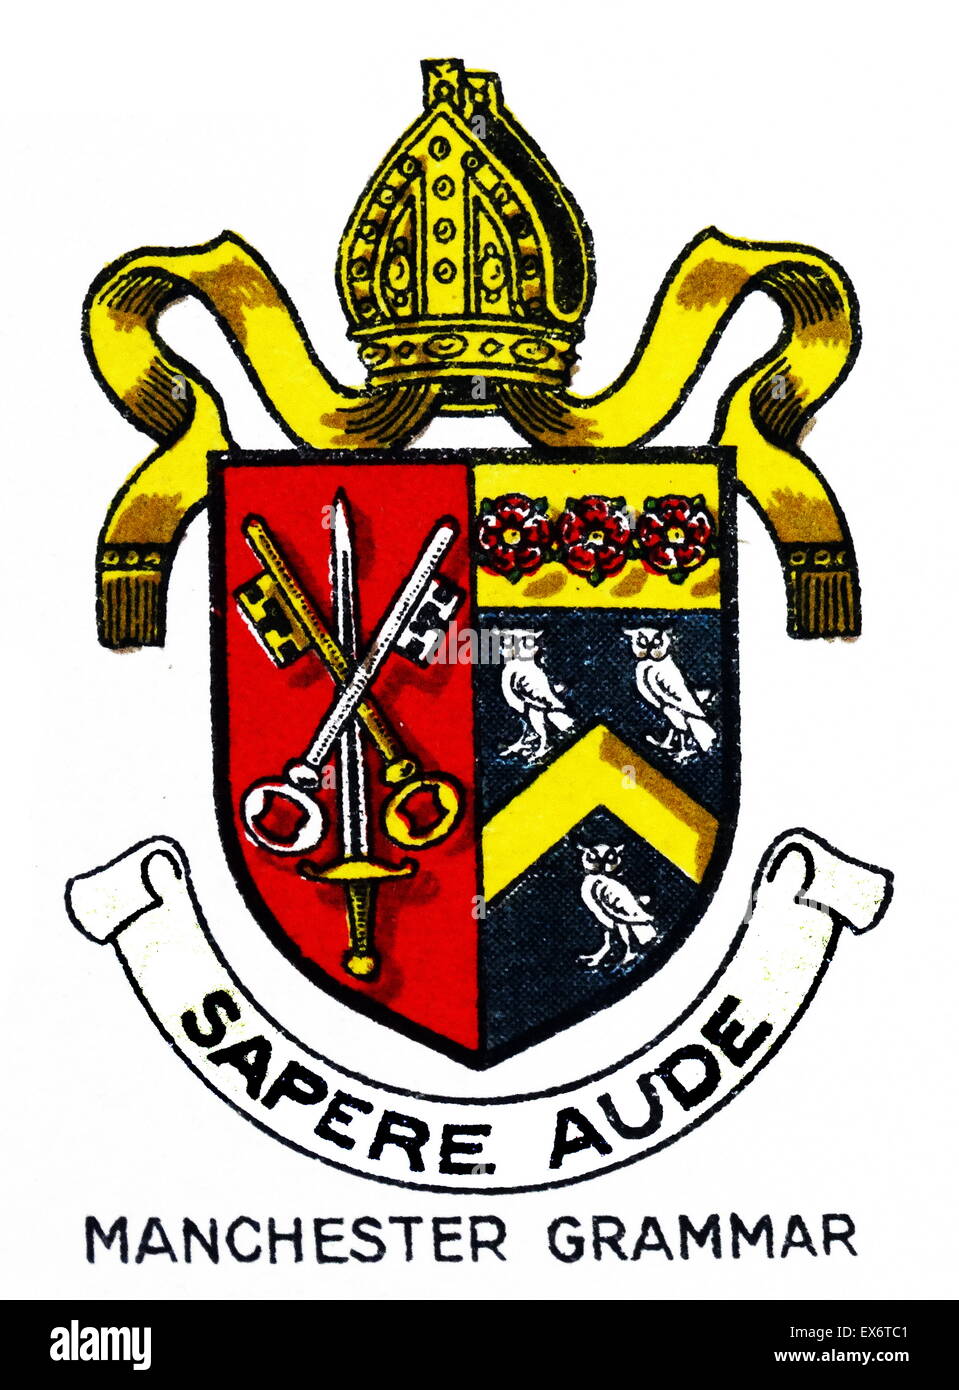 Emblem for Manchester Grammar School the largest independent day school for boys in the United Kingdom. It was founded by Hugh Oldham in 1515. Stock Photo